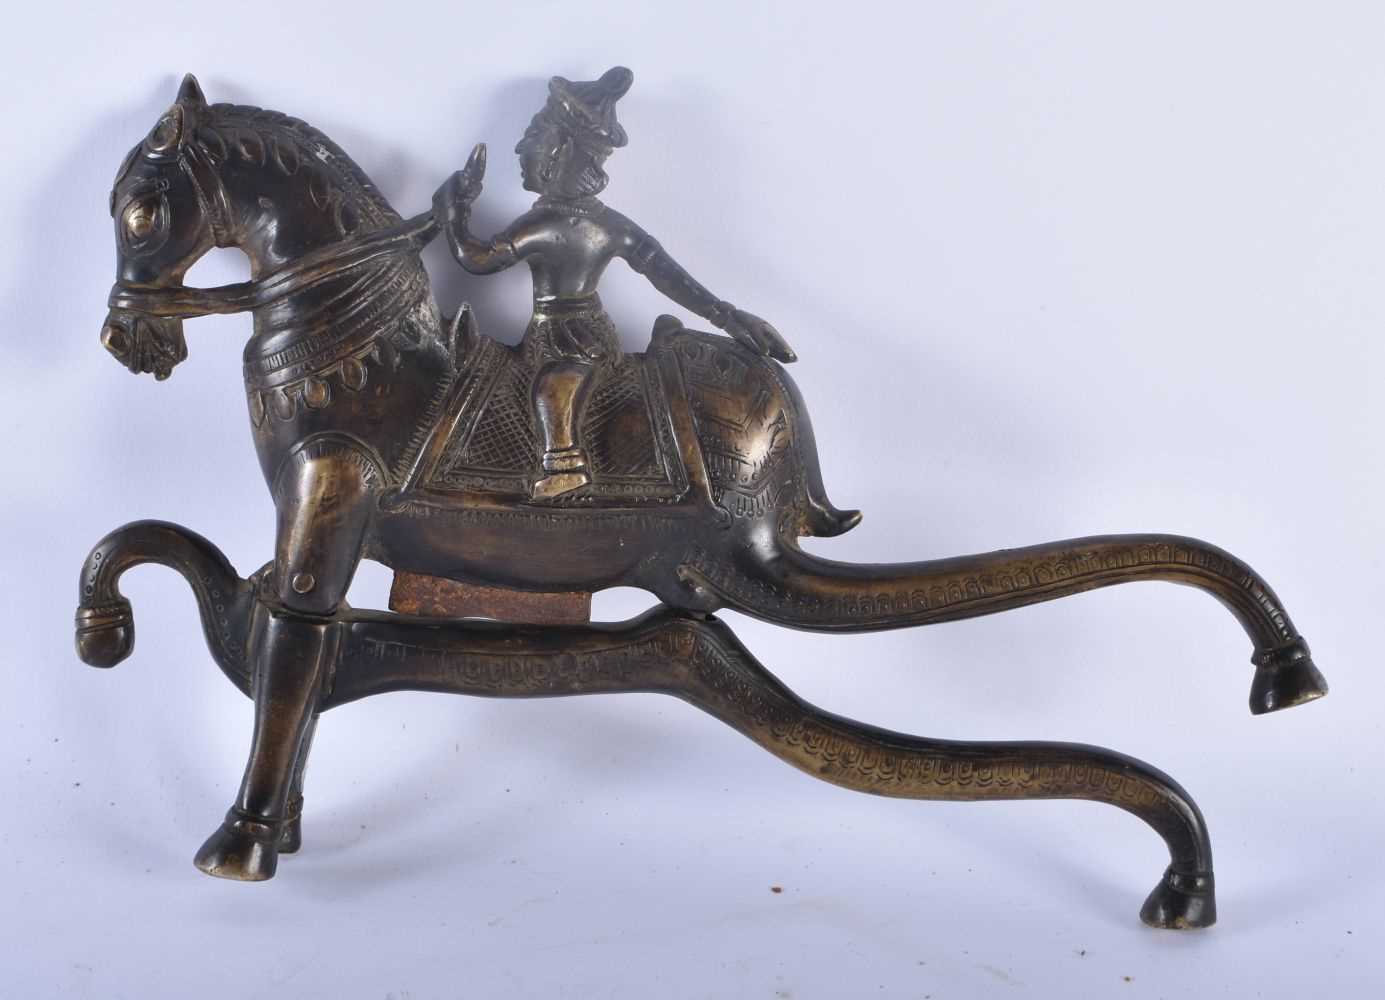 A VERY UNUSUAL LARGE 18TH/19TH CENTURY MIDDLE EASTERN INDIAN BRONZE BEETLE NUT CRACKER modelled as a - Image 4 of 4